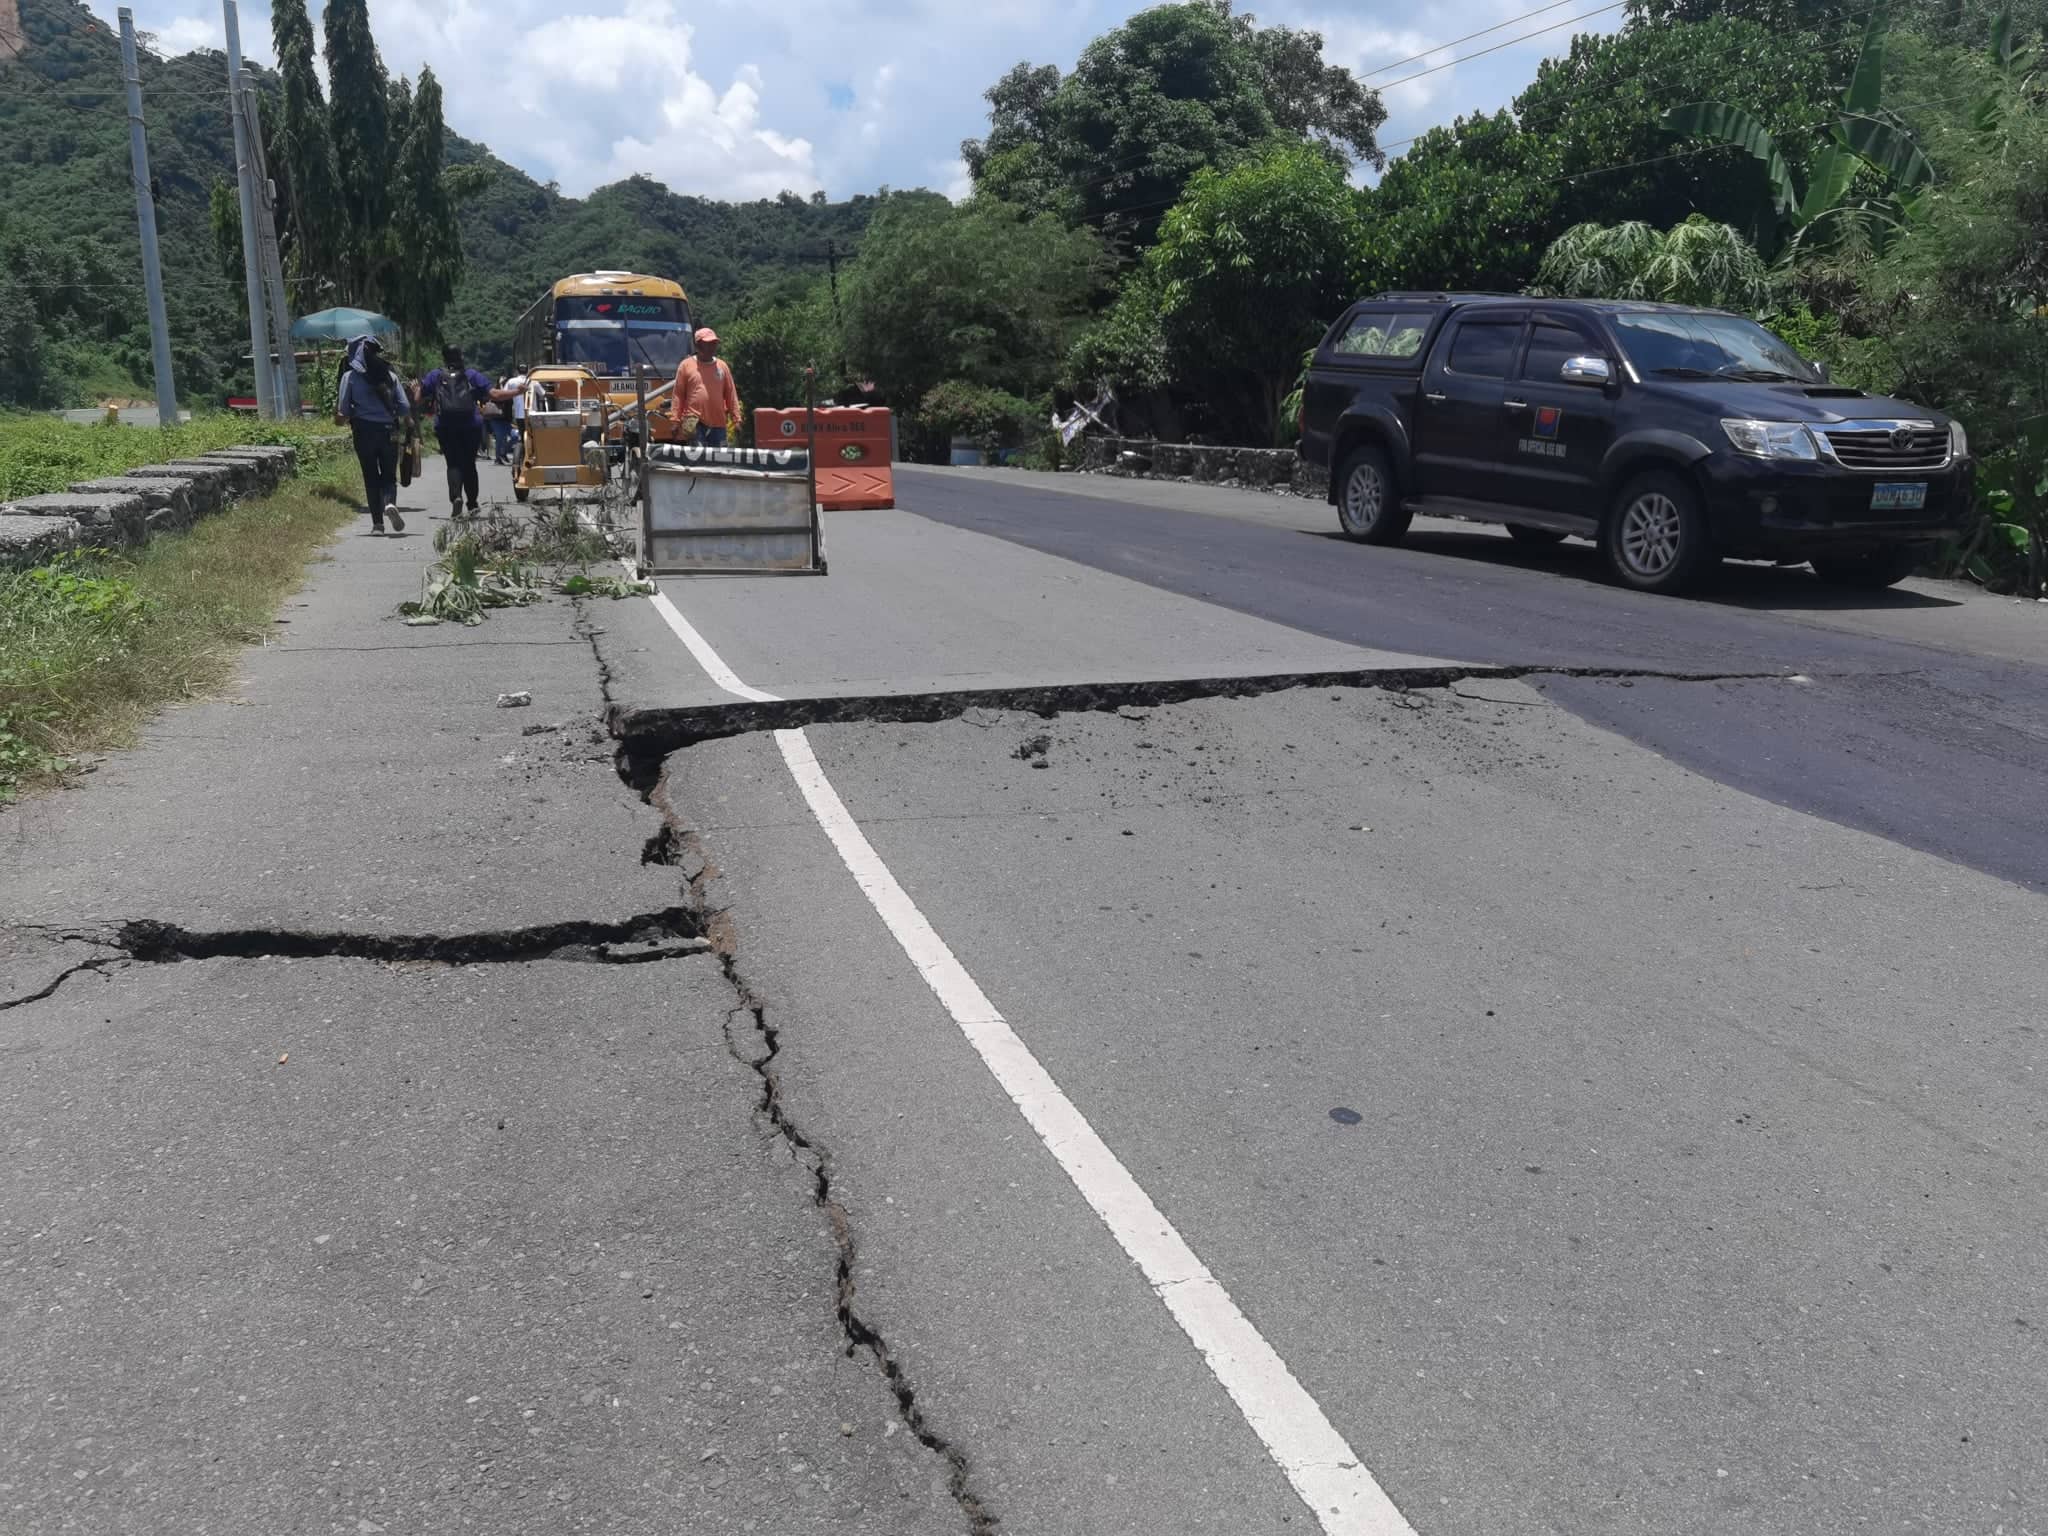 The Embassy of the Republic of Korea on Monday announced that it will provide 200,000 US Dollars worth of humanitarian assistance to the Philippines after the magnitude 7.0 earthquake in Abra that shook several parts of Luzon.